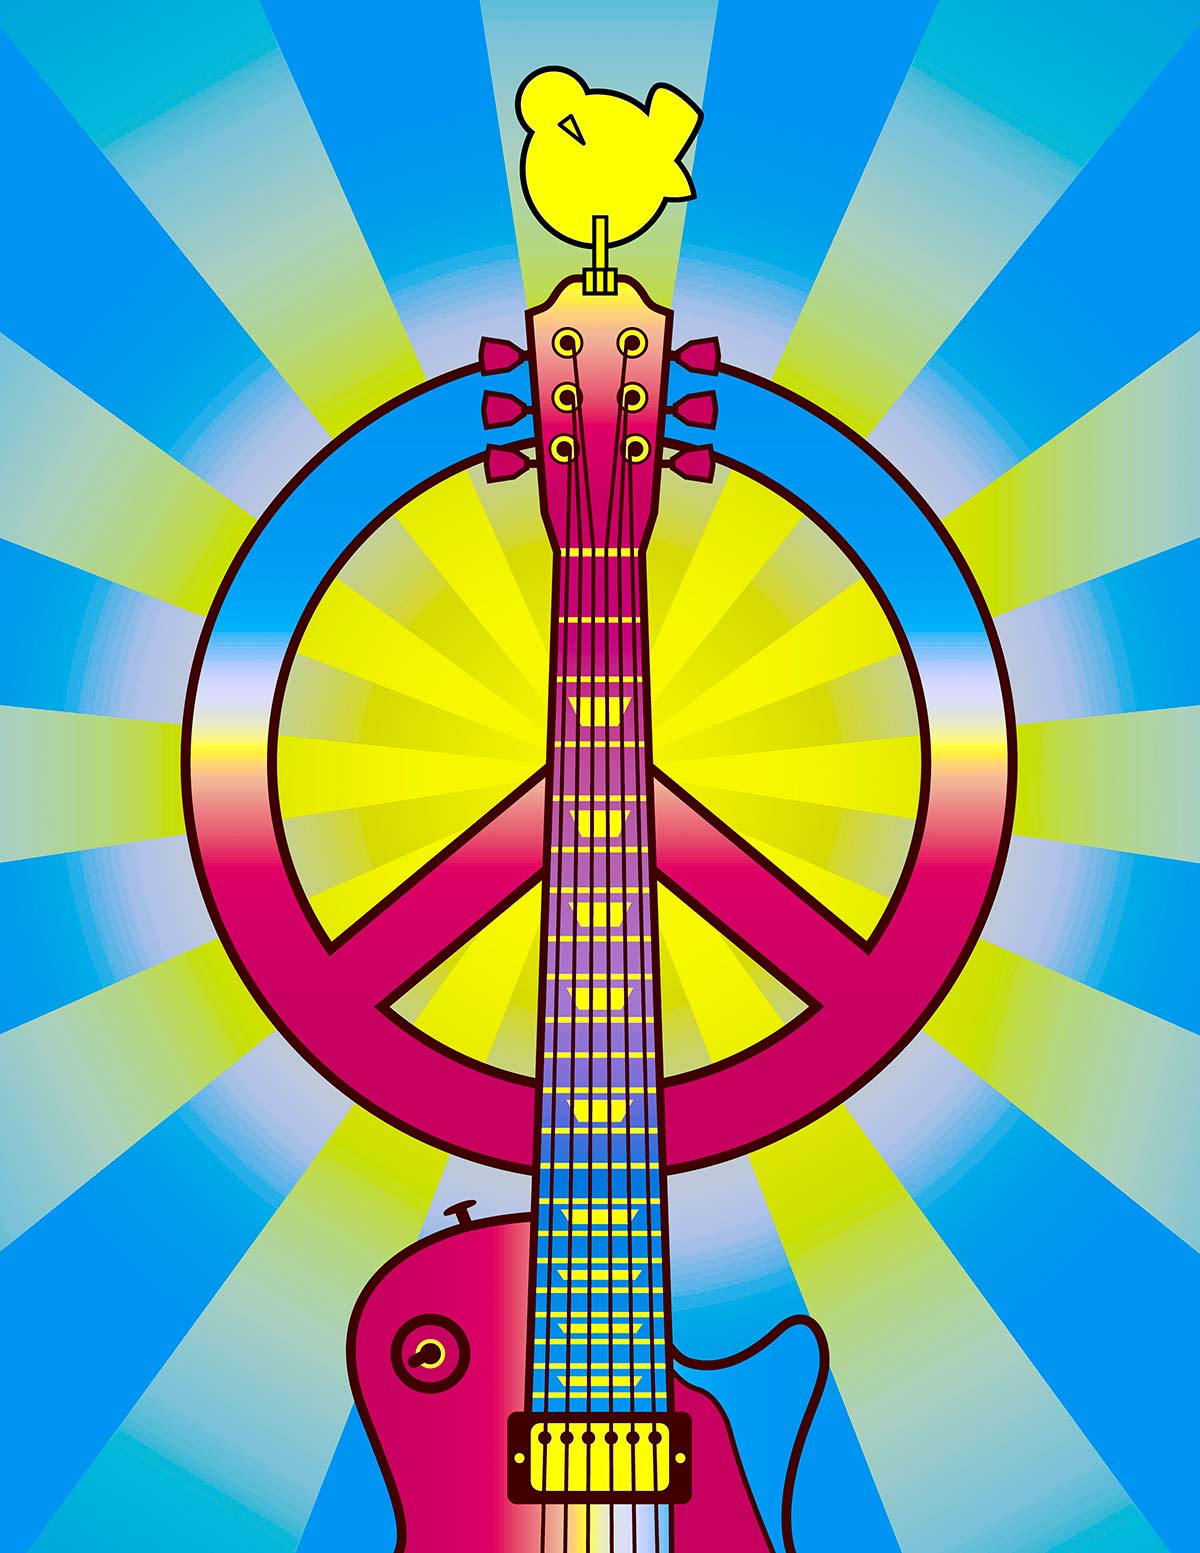 A Woodstock poster with a guitar, peace sign, and a dove